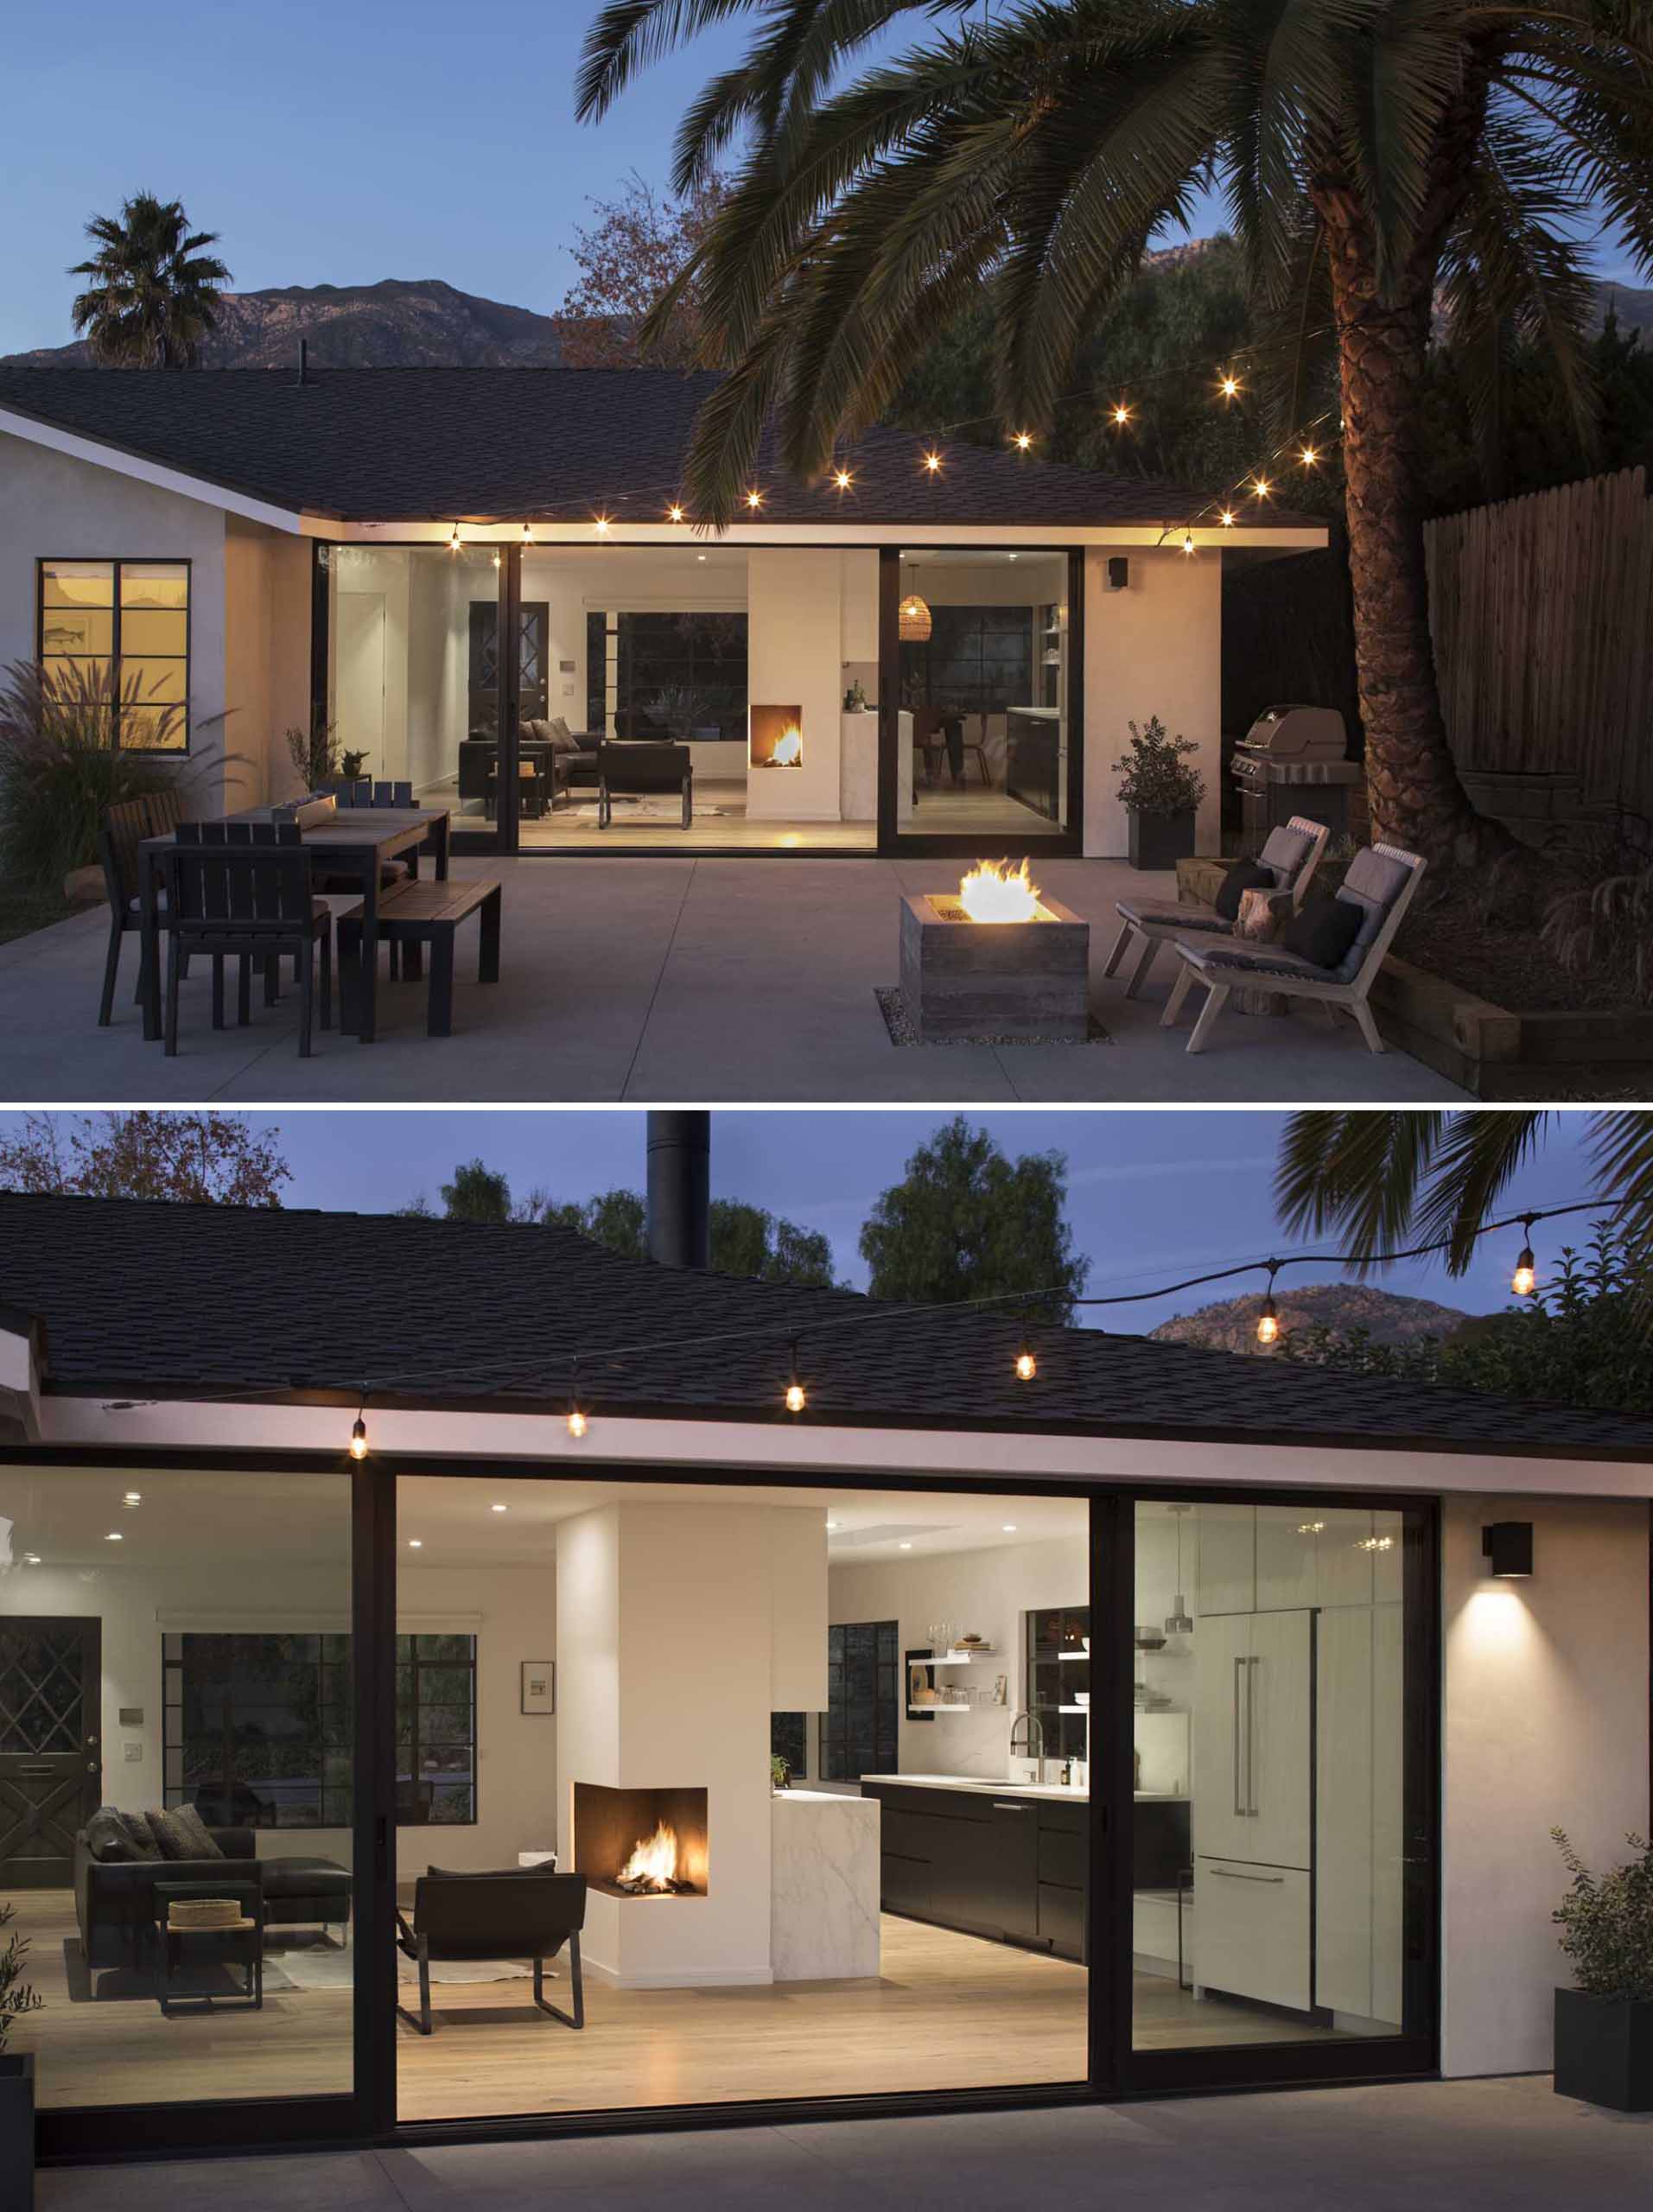 A new, large glass sliding wall now leads out to the rear yard, where there's a patio with outdoor dining, a BBQ, and a fire pit. String lights help to create an ideal outdoor entertaining area.